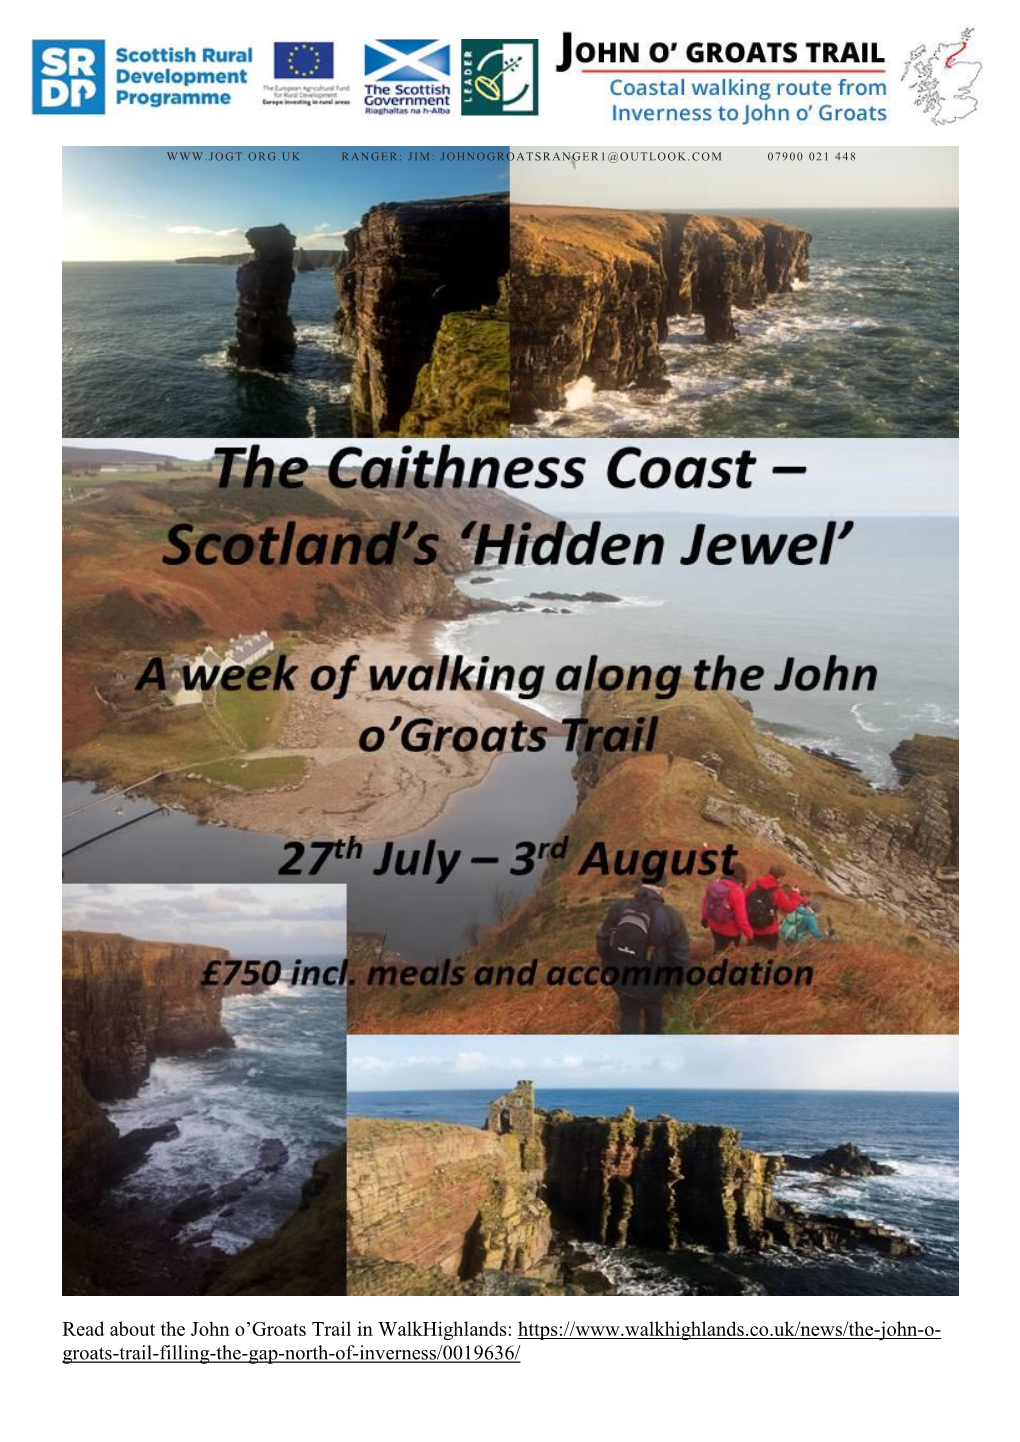 Read About the John O'groats Trail in Walkhighlands